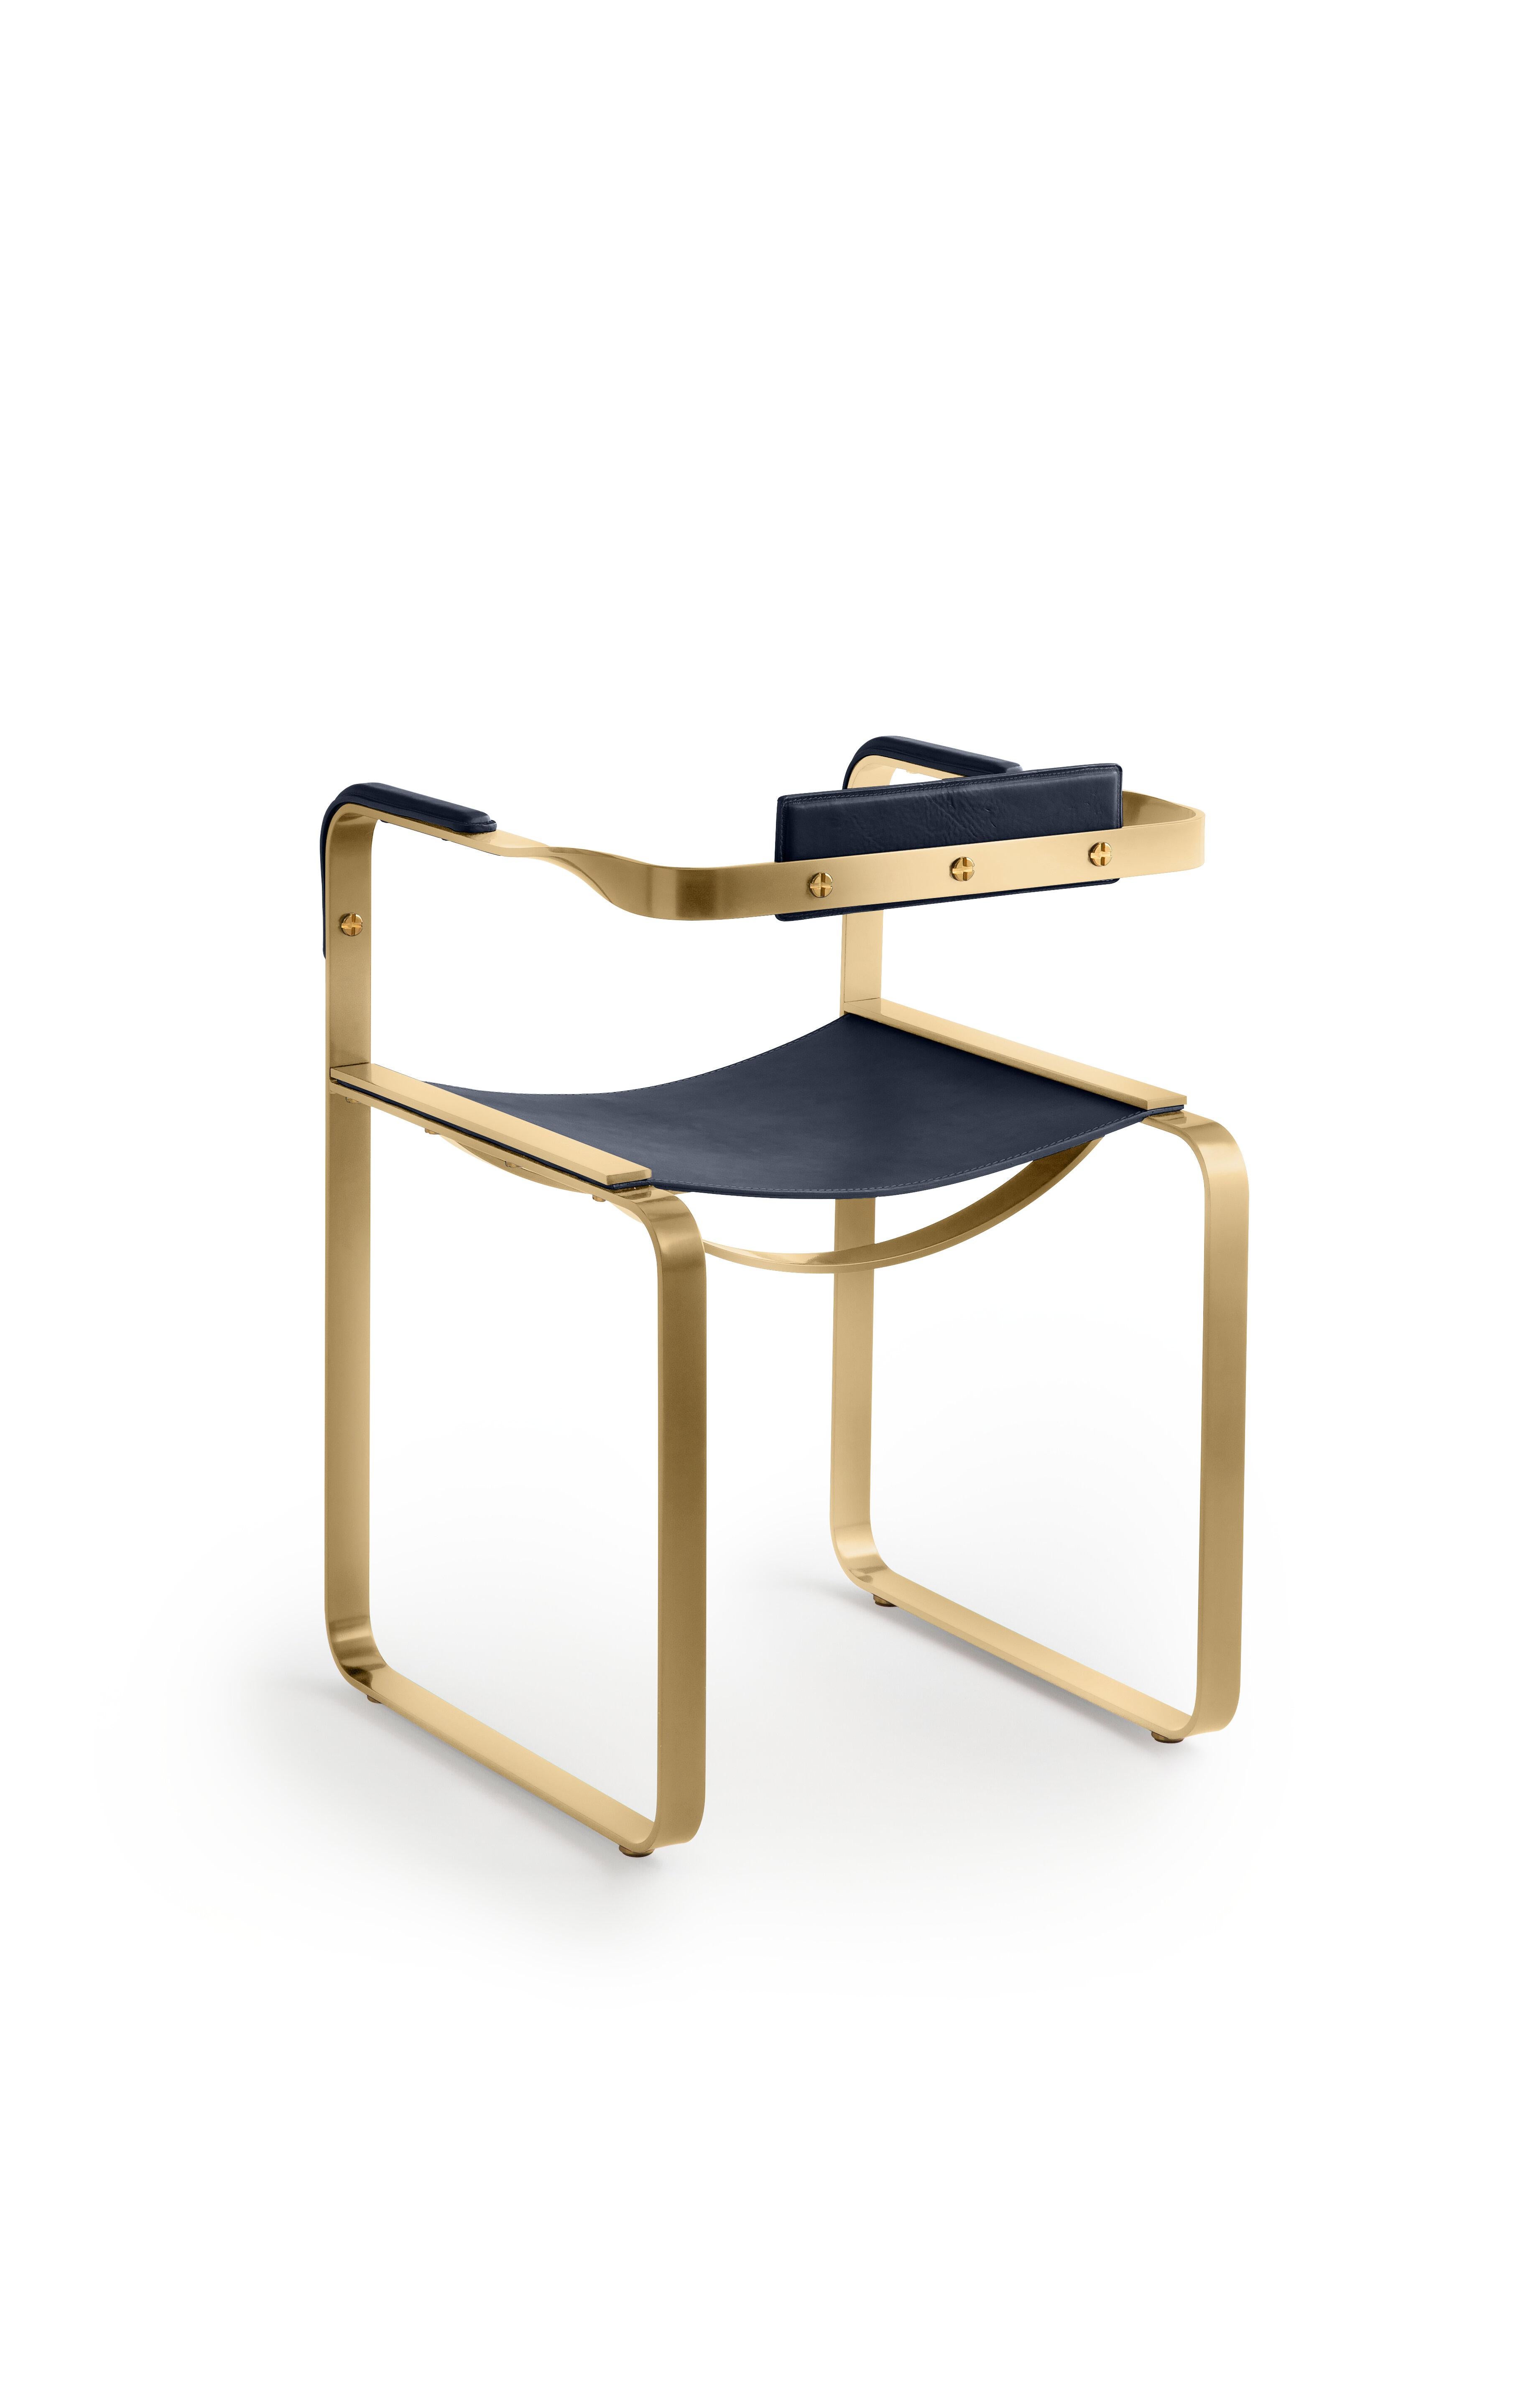 Minimalist Armchair, Aged Brass Steel & Blue Navy Saddle Leather, Contemporary Style For Sale